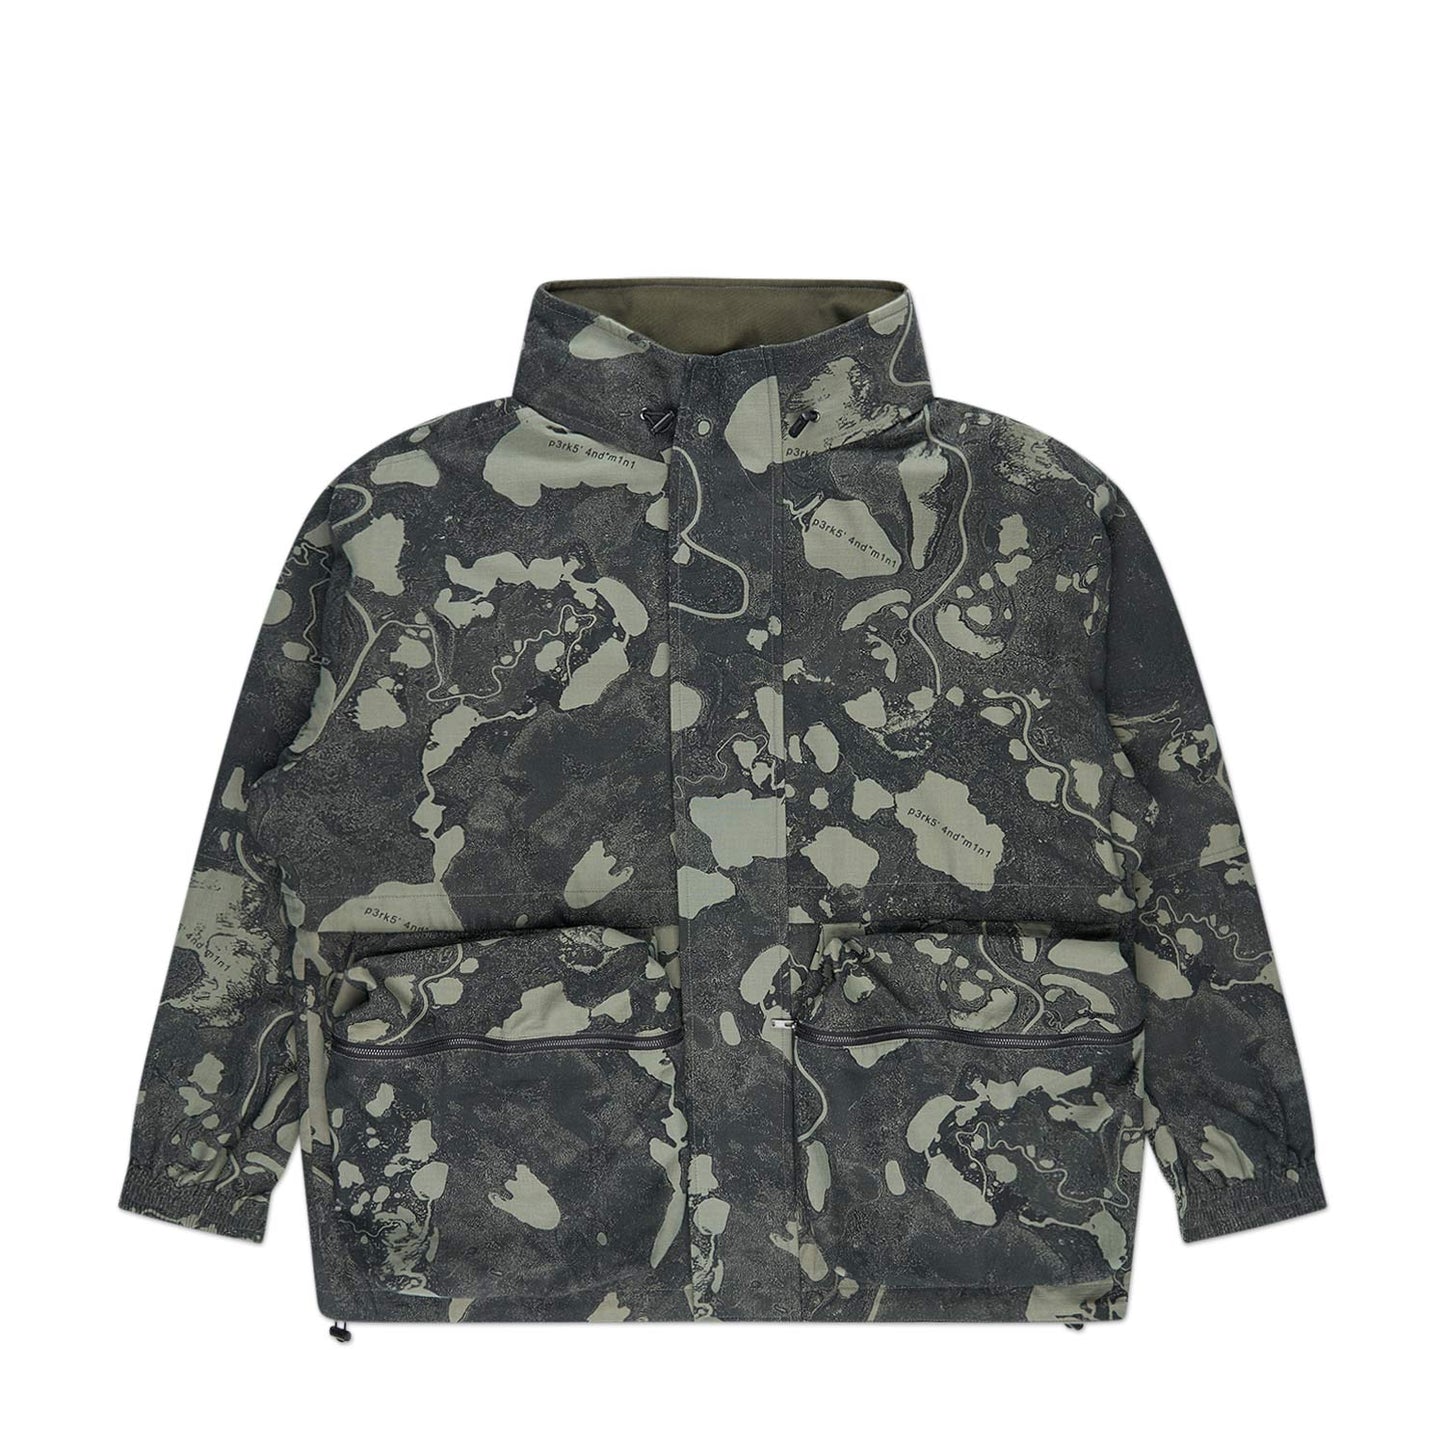 perks and mini reversible geo mapping parka jacket (swamp)